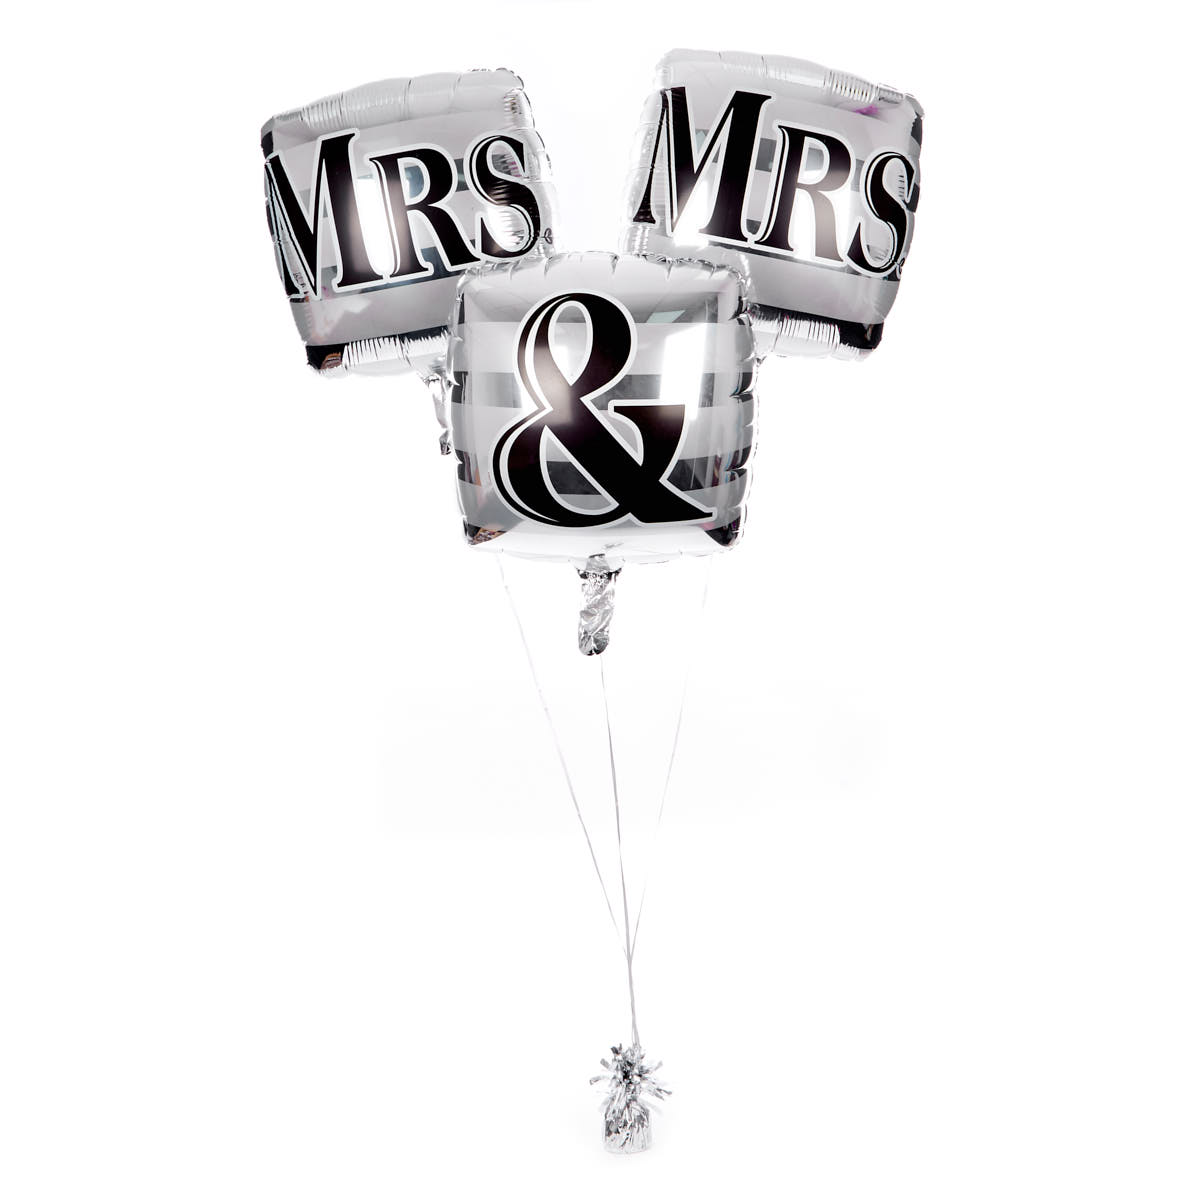 Square Mrs & Mrs Balloon Bouquet - DELIVERED INFLATED!